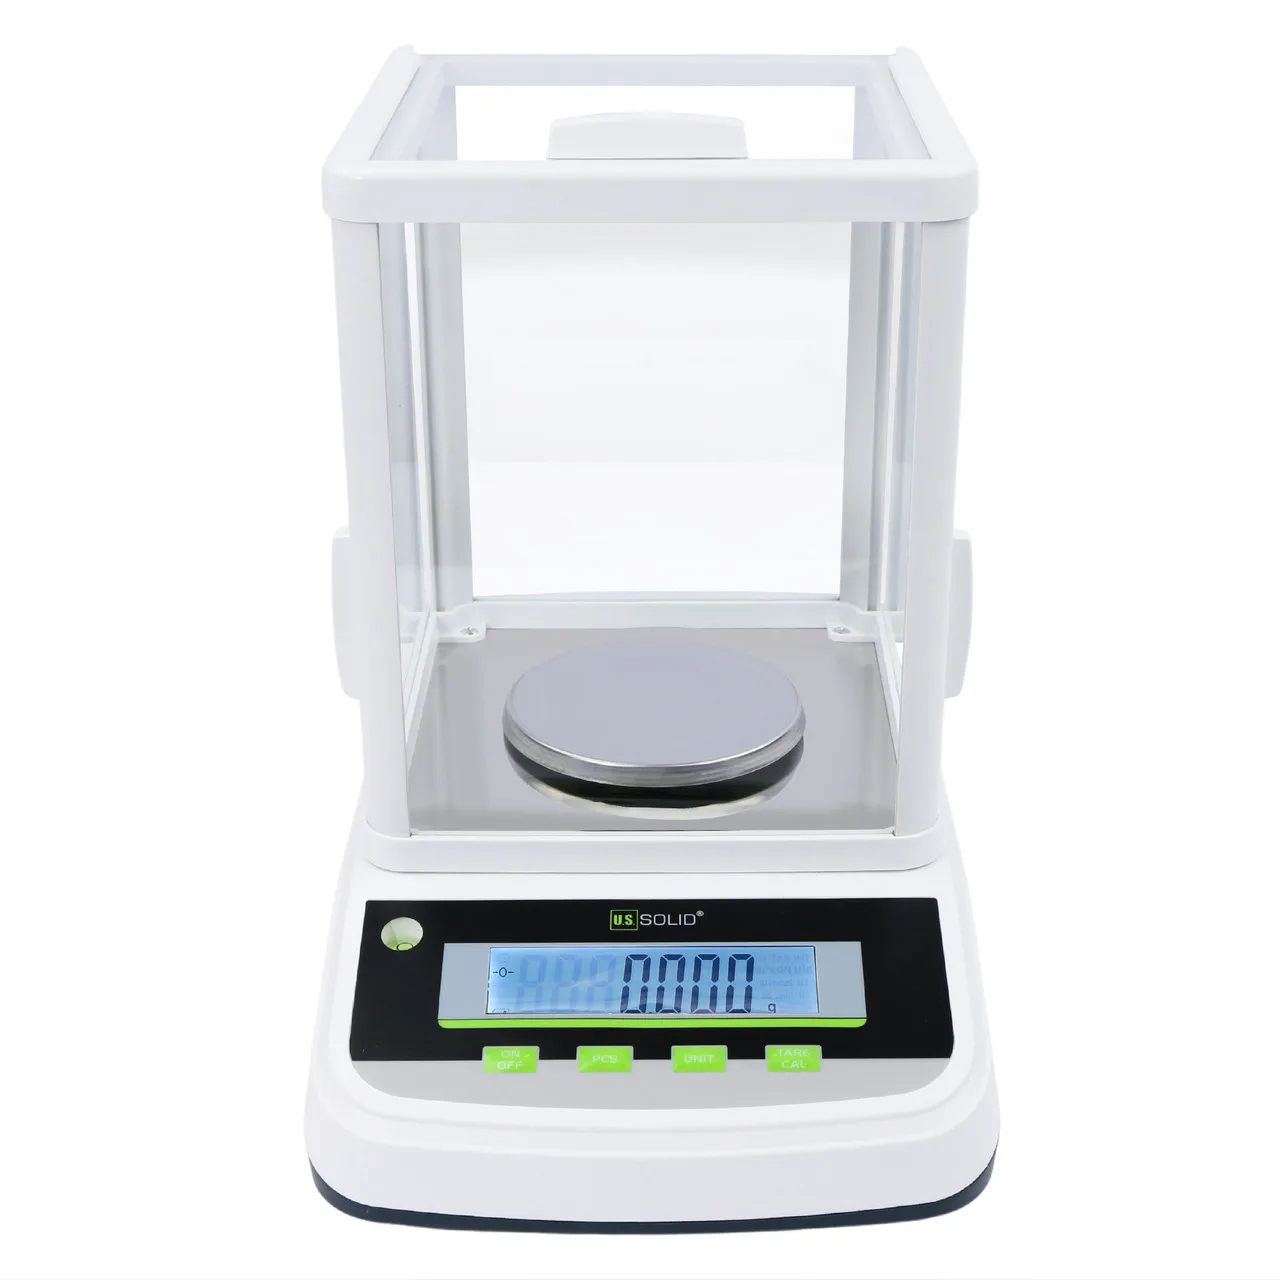 https://ae01.alicdn.com/kf/S85e3d6c0f3c945f9b5b2345e0fc4cd2fT/U-S-Solid-100-x-0-001g-Analytical-Balance-1-mg-Digital-Precision-Lab-Scale-with.jpg